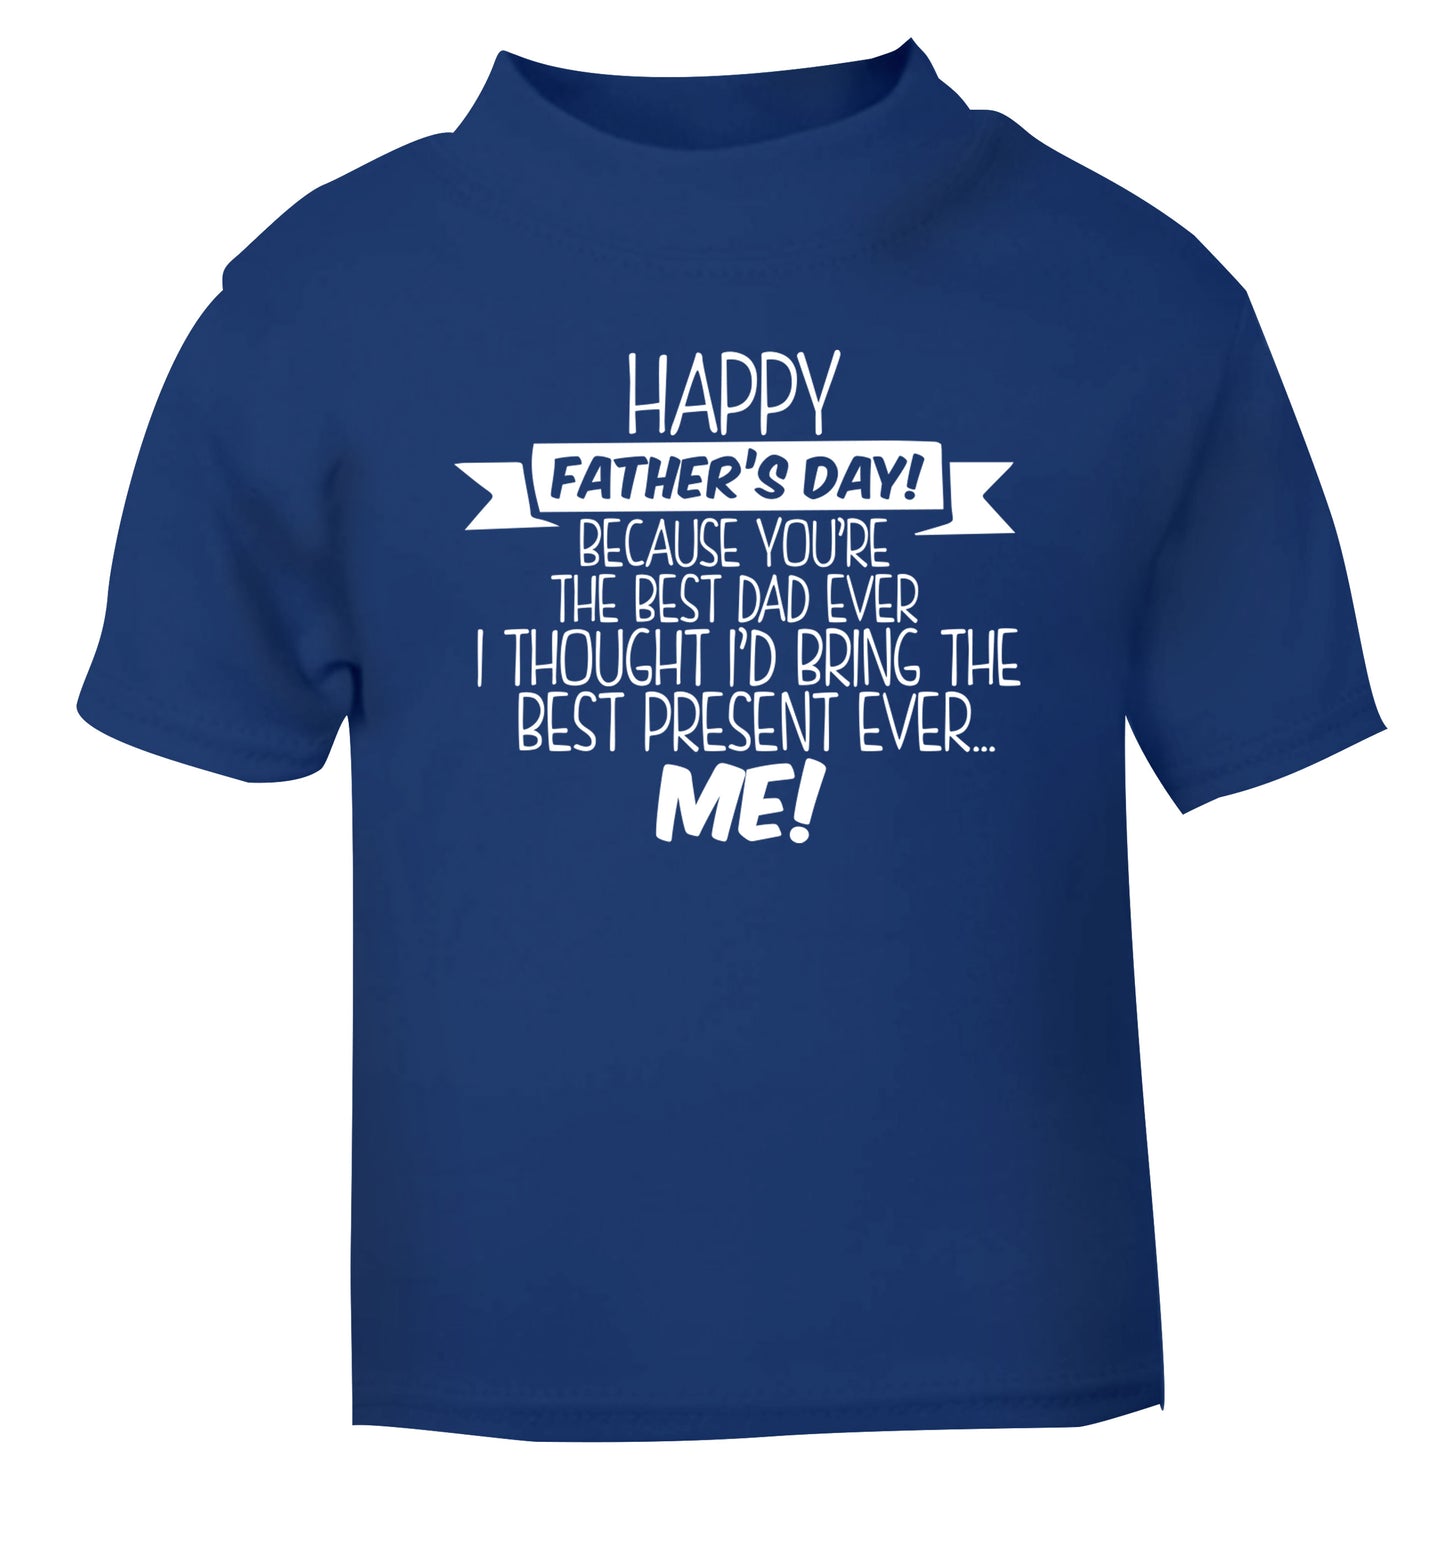 Happy Father's day, because you're the best dad ever I thought I'd bring the best present ever...me! blue Baby Toddler Tshirt 2 Years